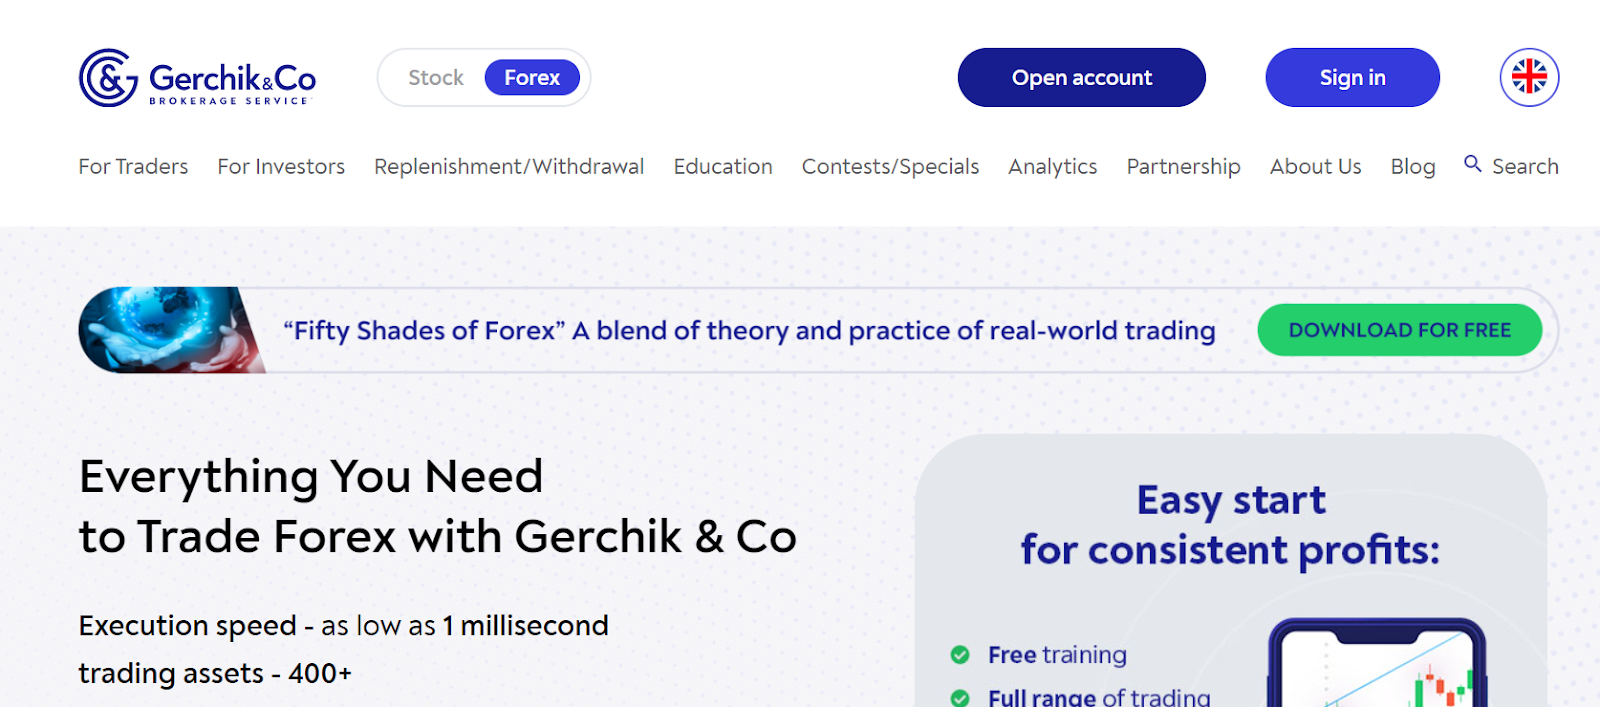 Overview of Gerchik&Co’ User Account — Opening a user account